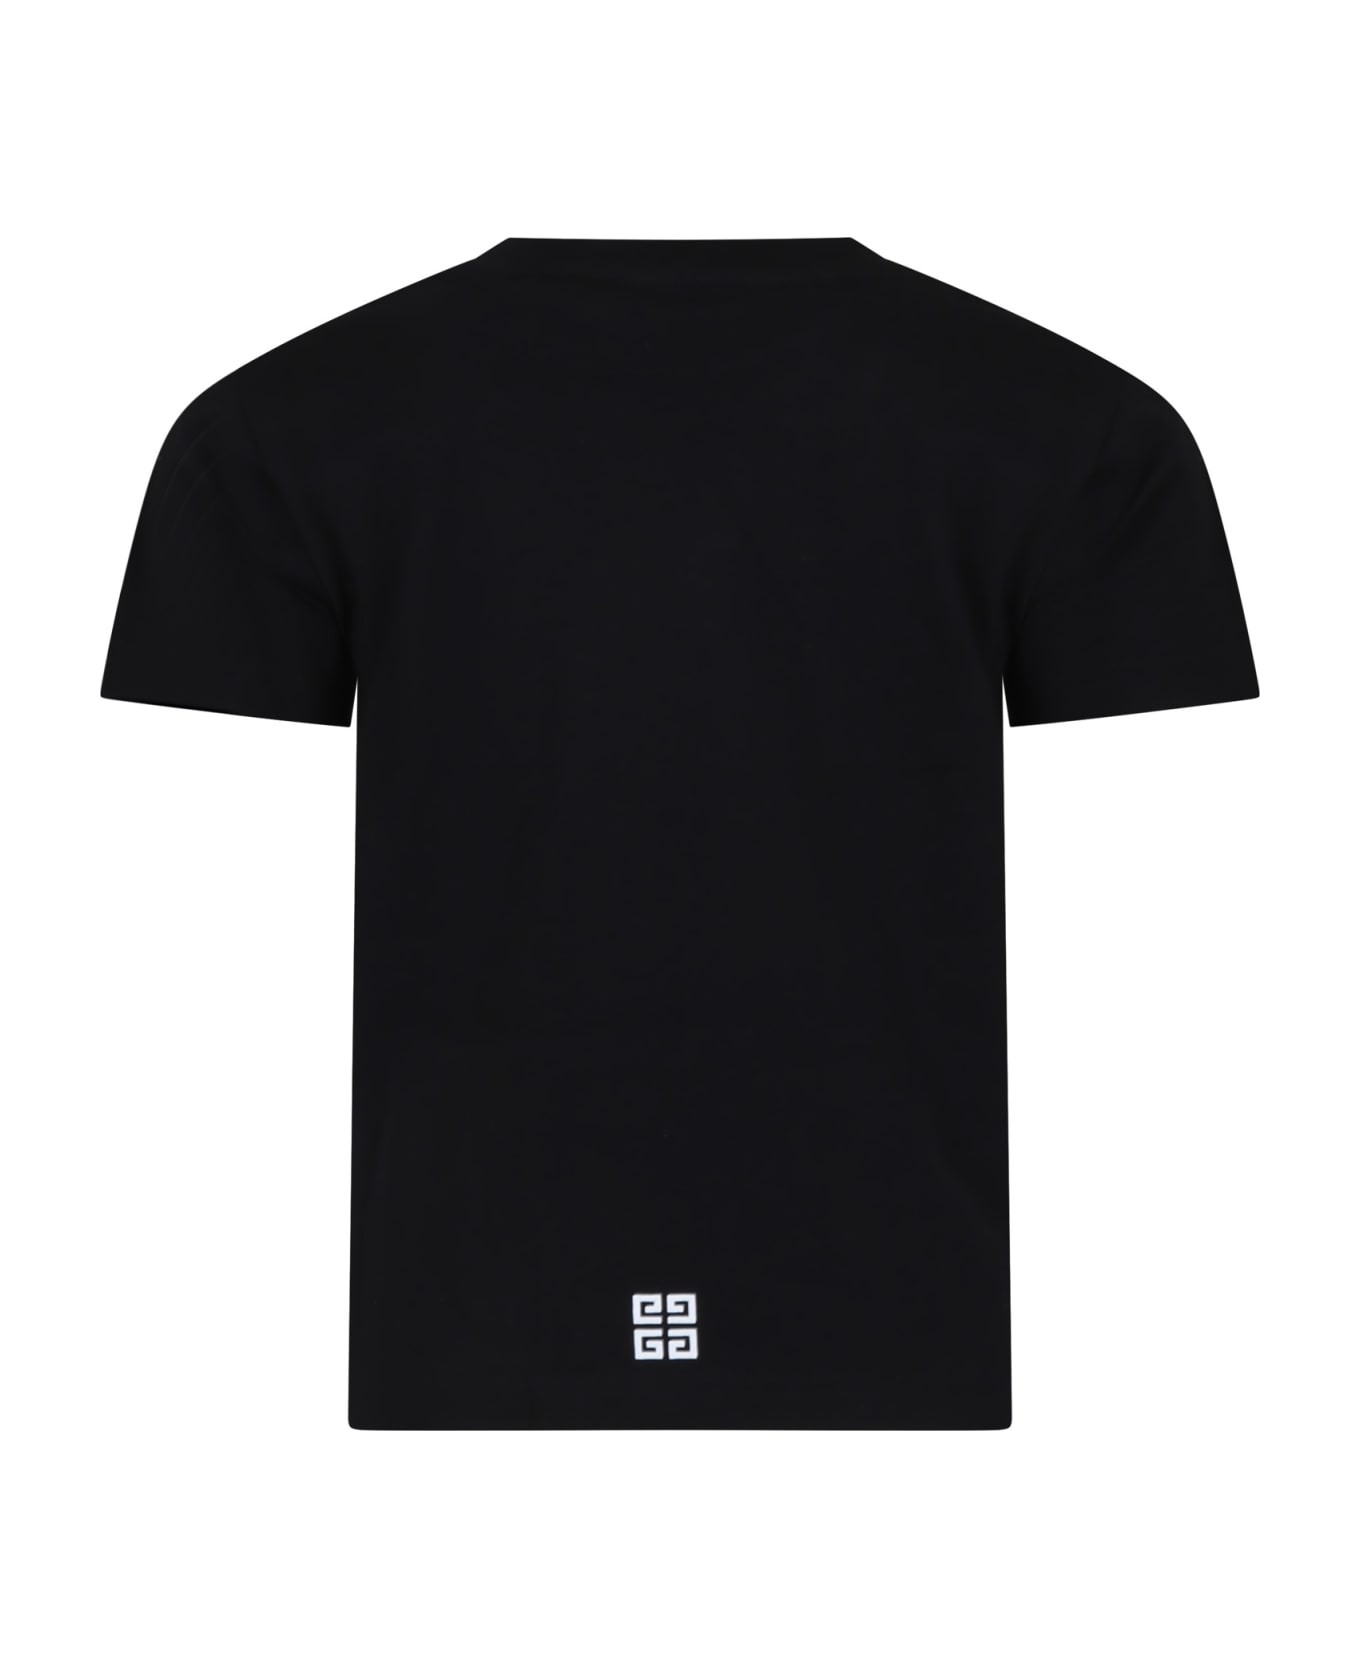 Givenchy Black T-shirt For Kids With Logo - BLACK